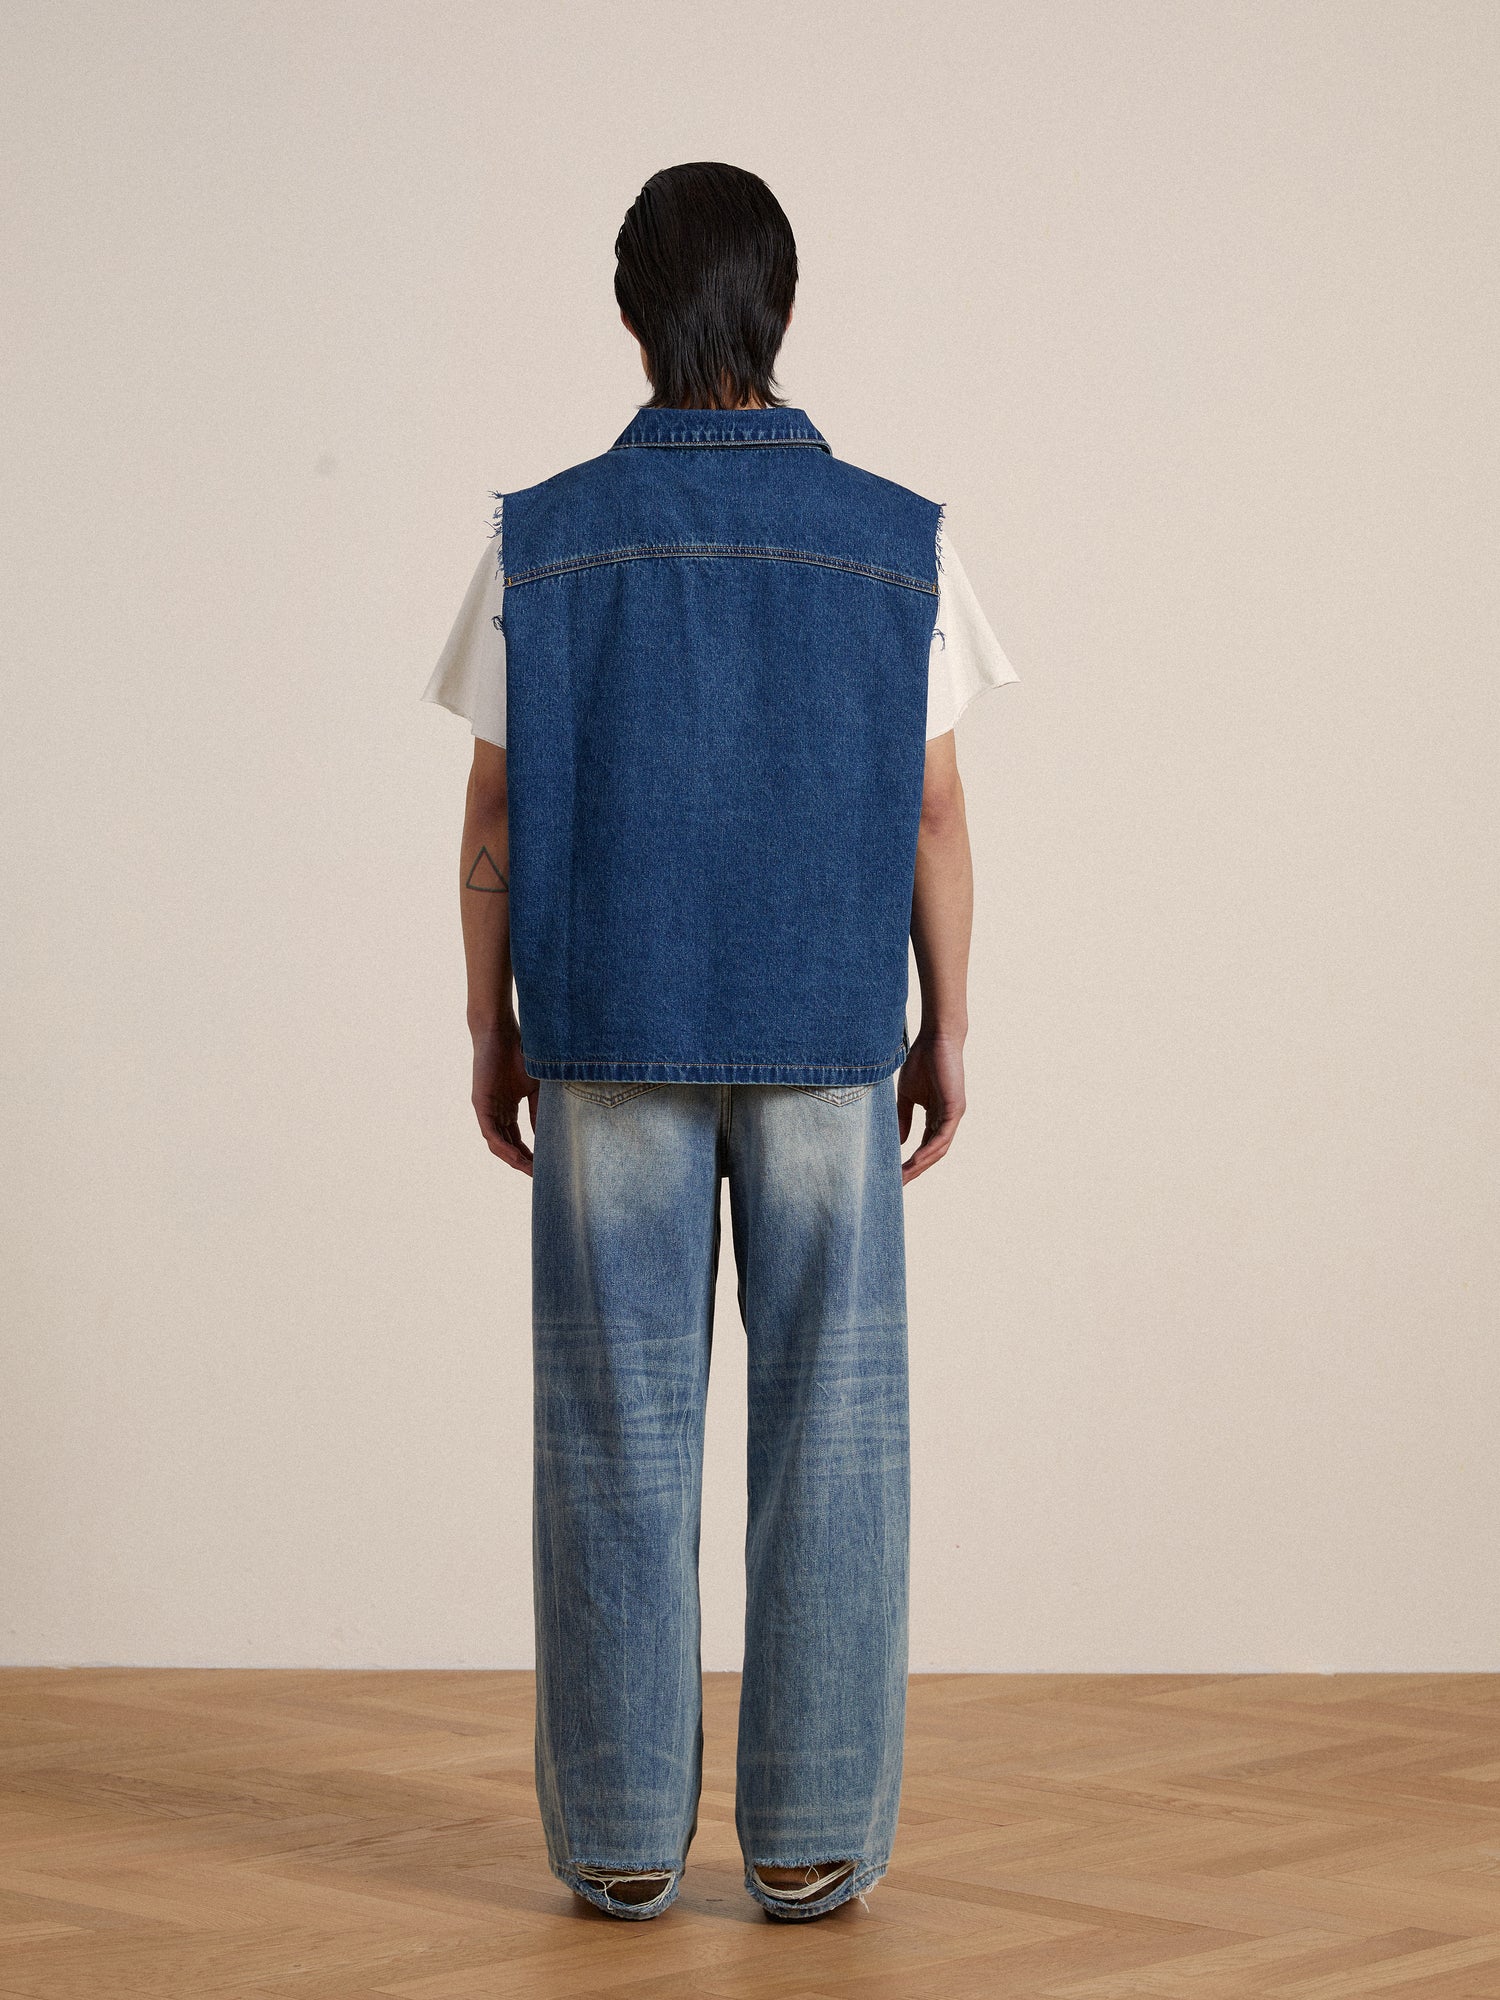 The back view of a man wearing a Found Raw Cut Patch Mechanic Denim Vest with embroidered patches.